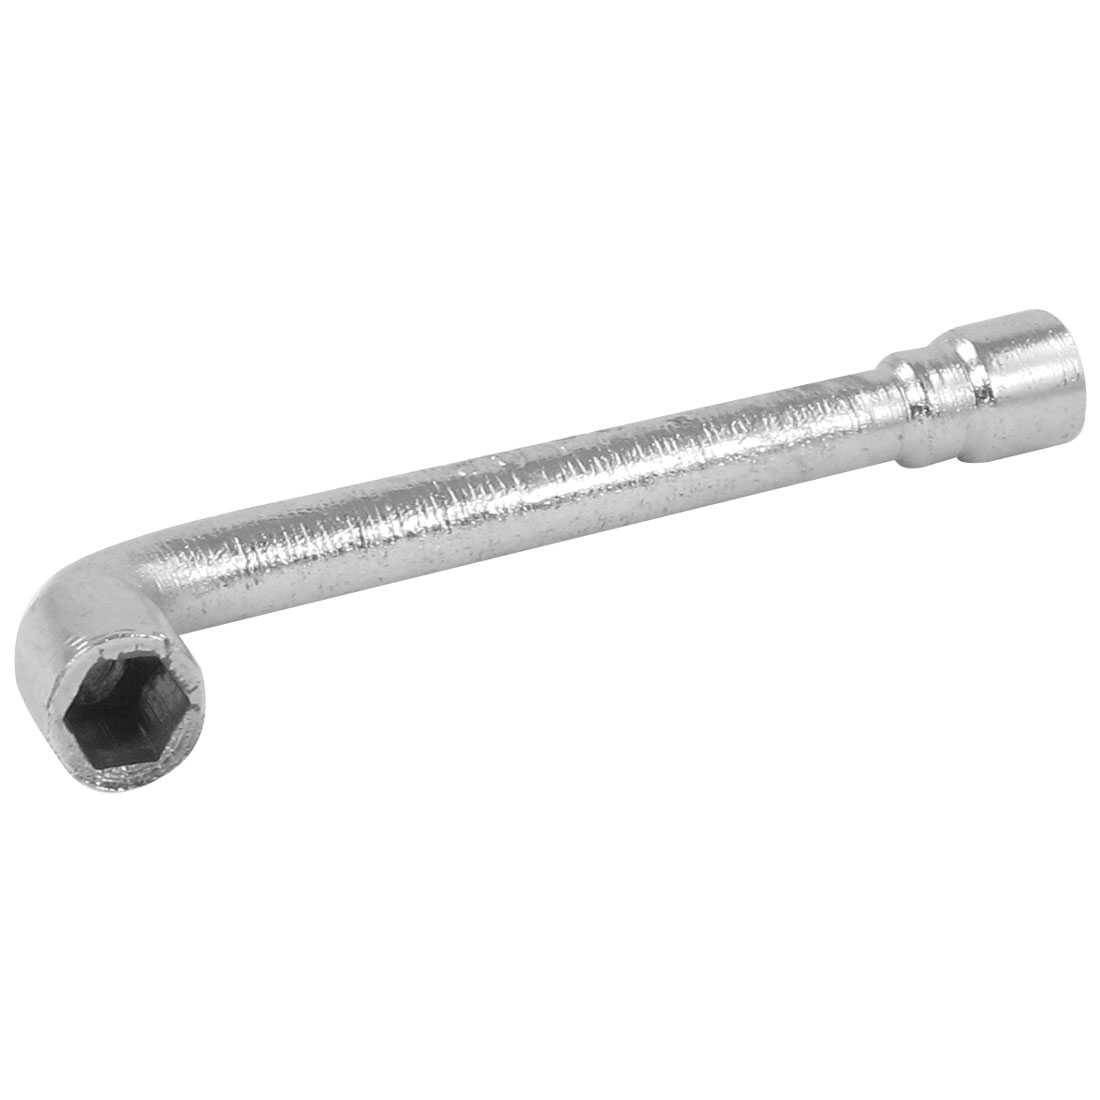 Unique Bargains L Type 8mm Double Ends Hex Socket Wrench Spanner Handware Tool